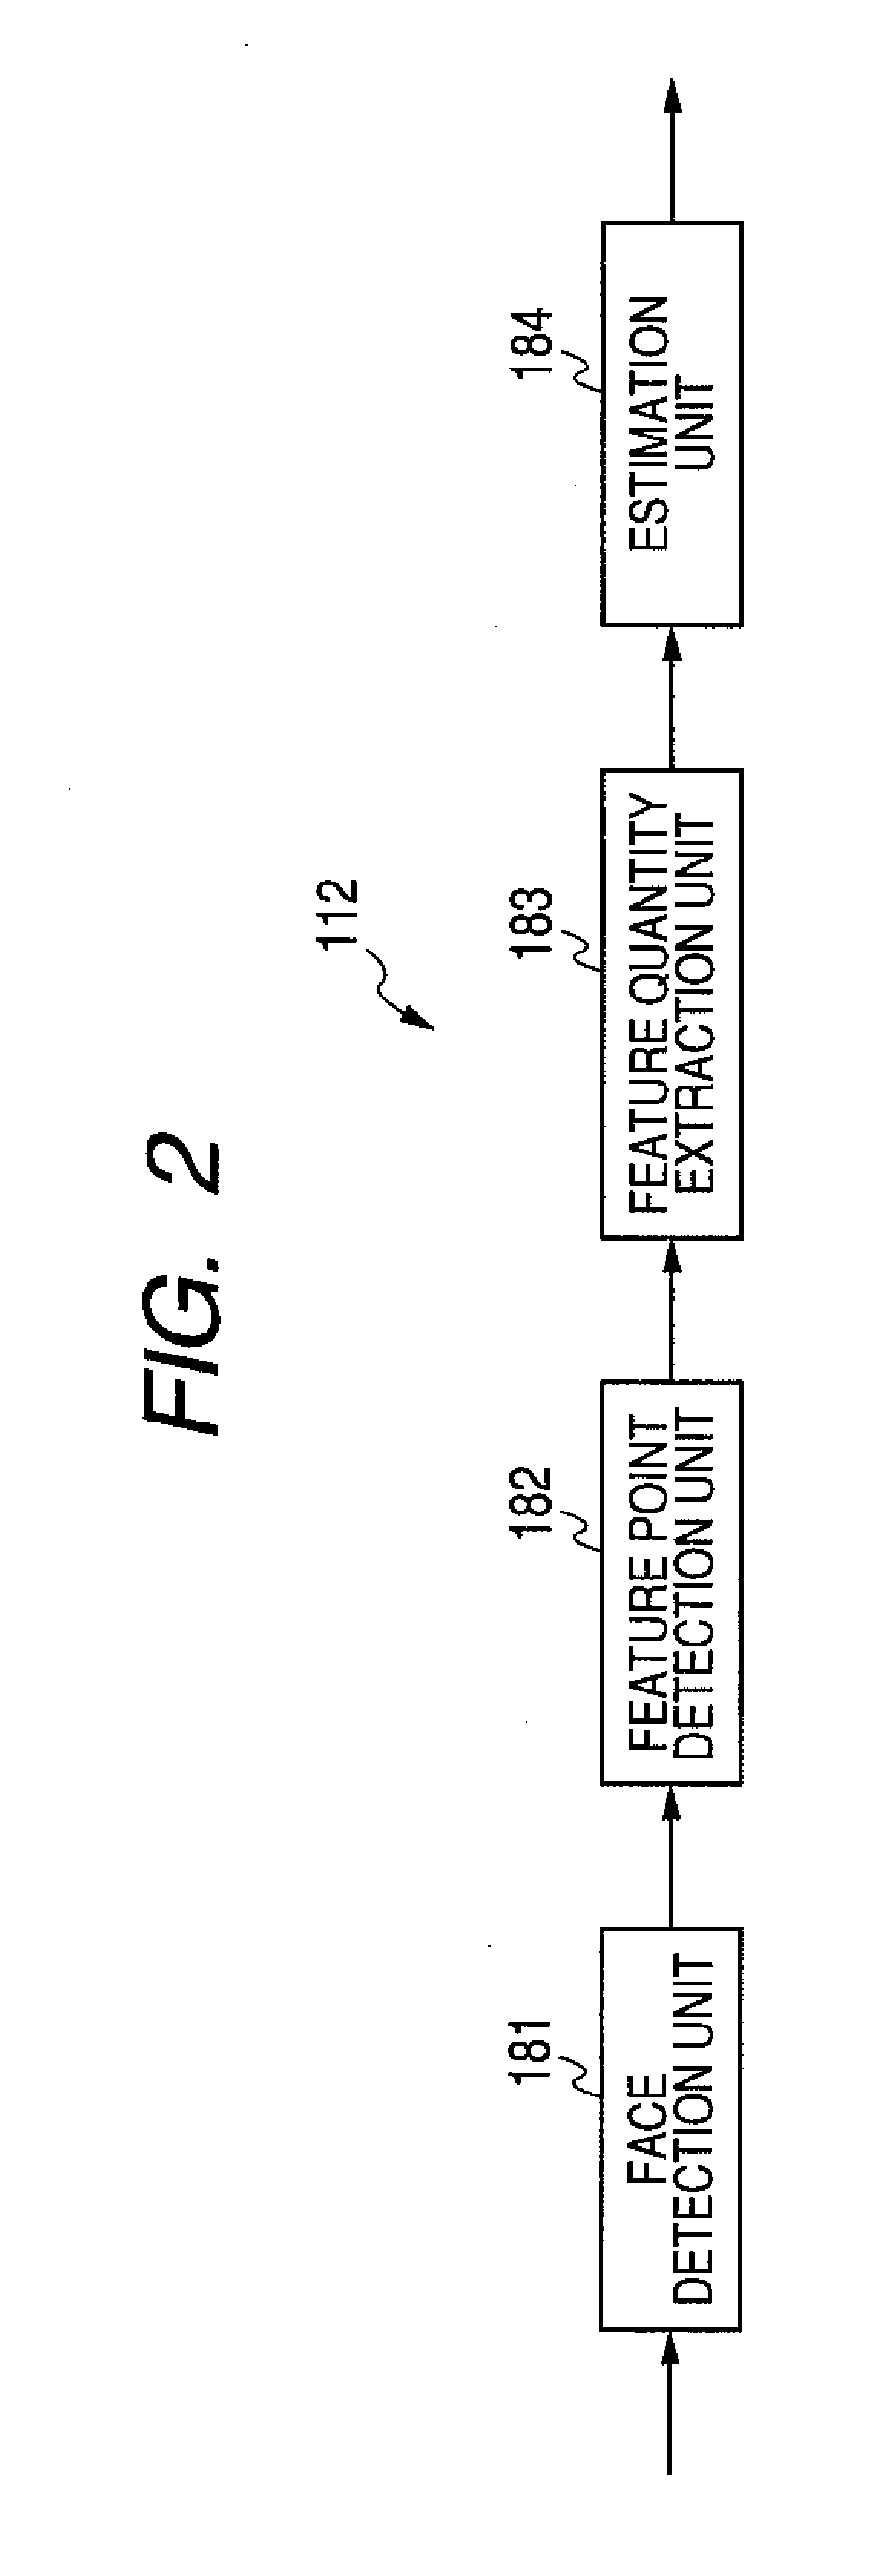 Driving support apparatus, method and program